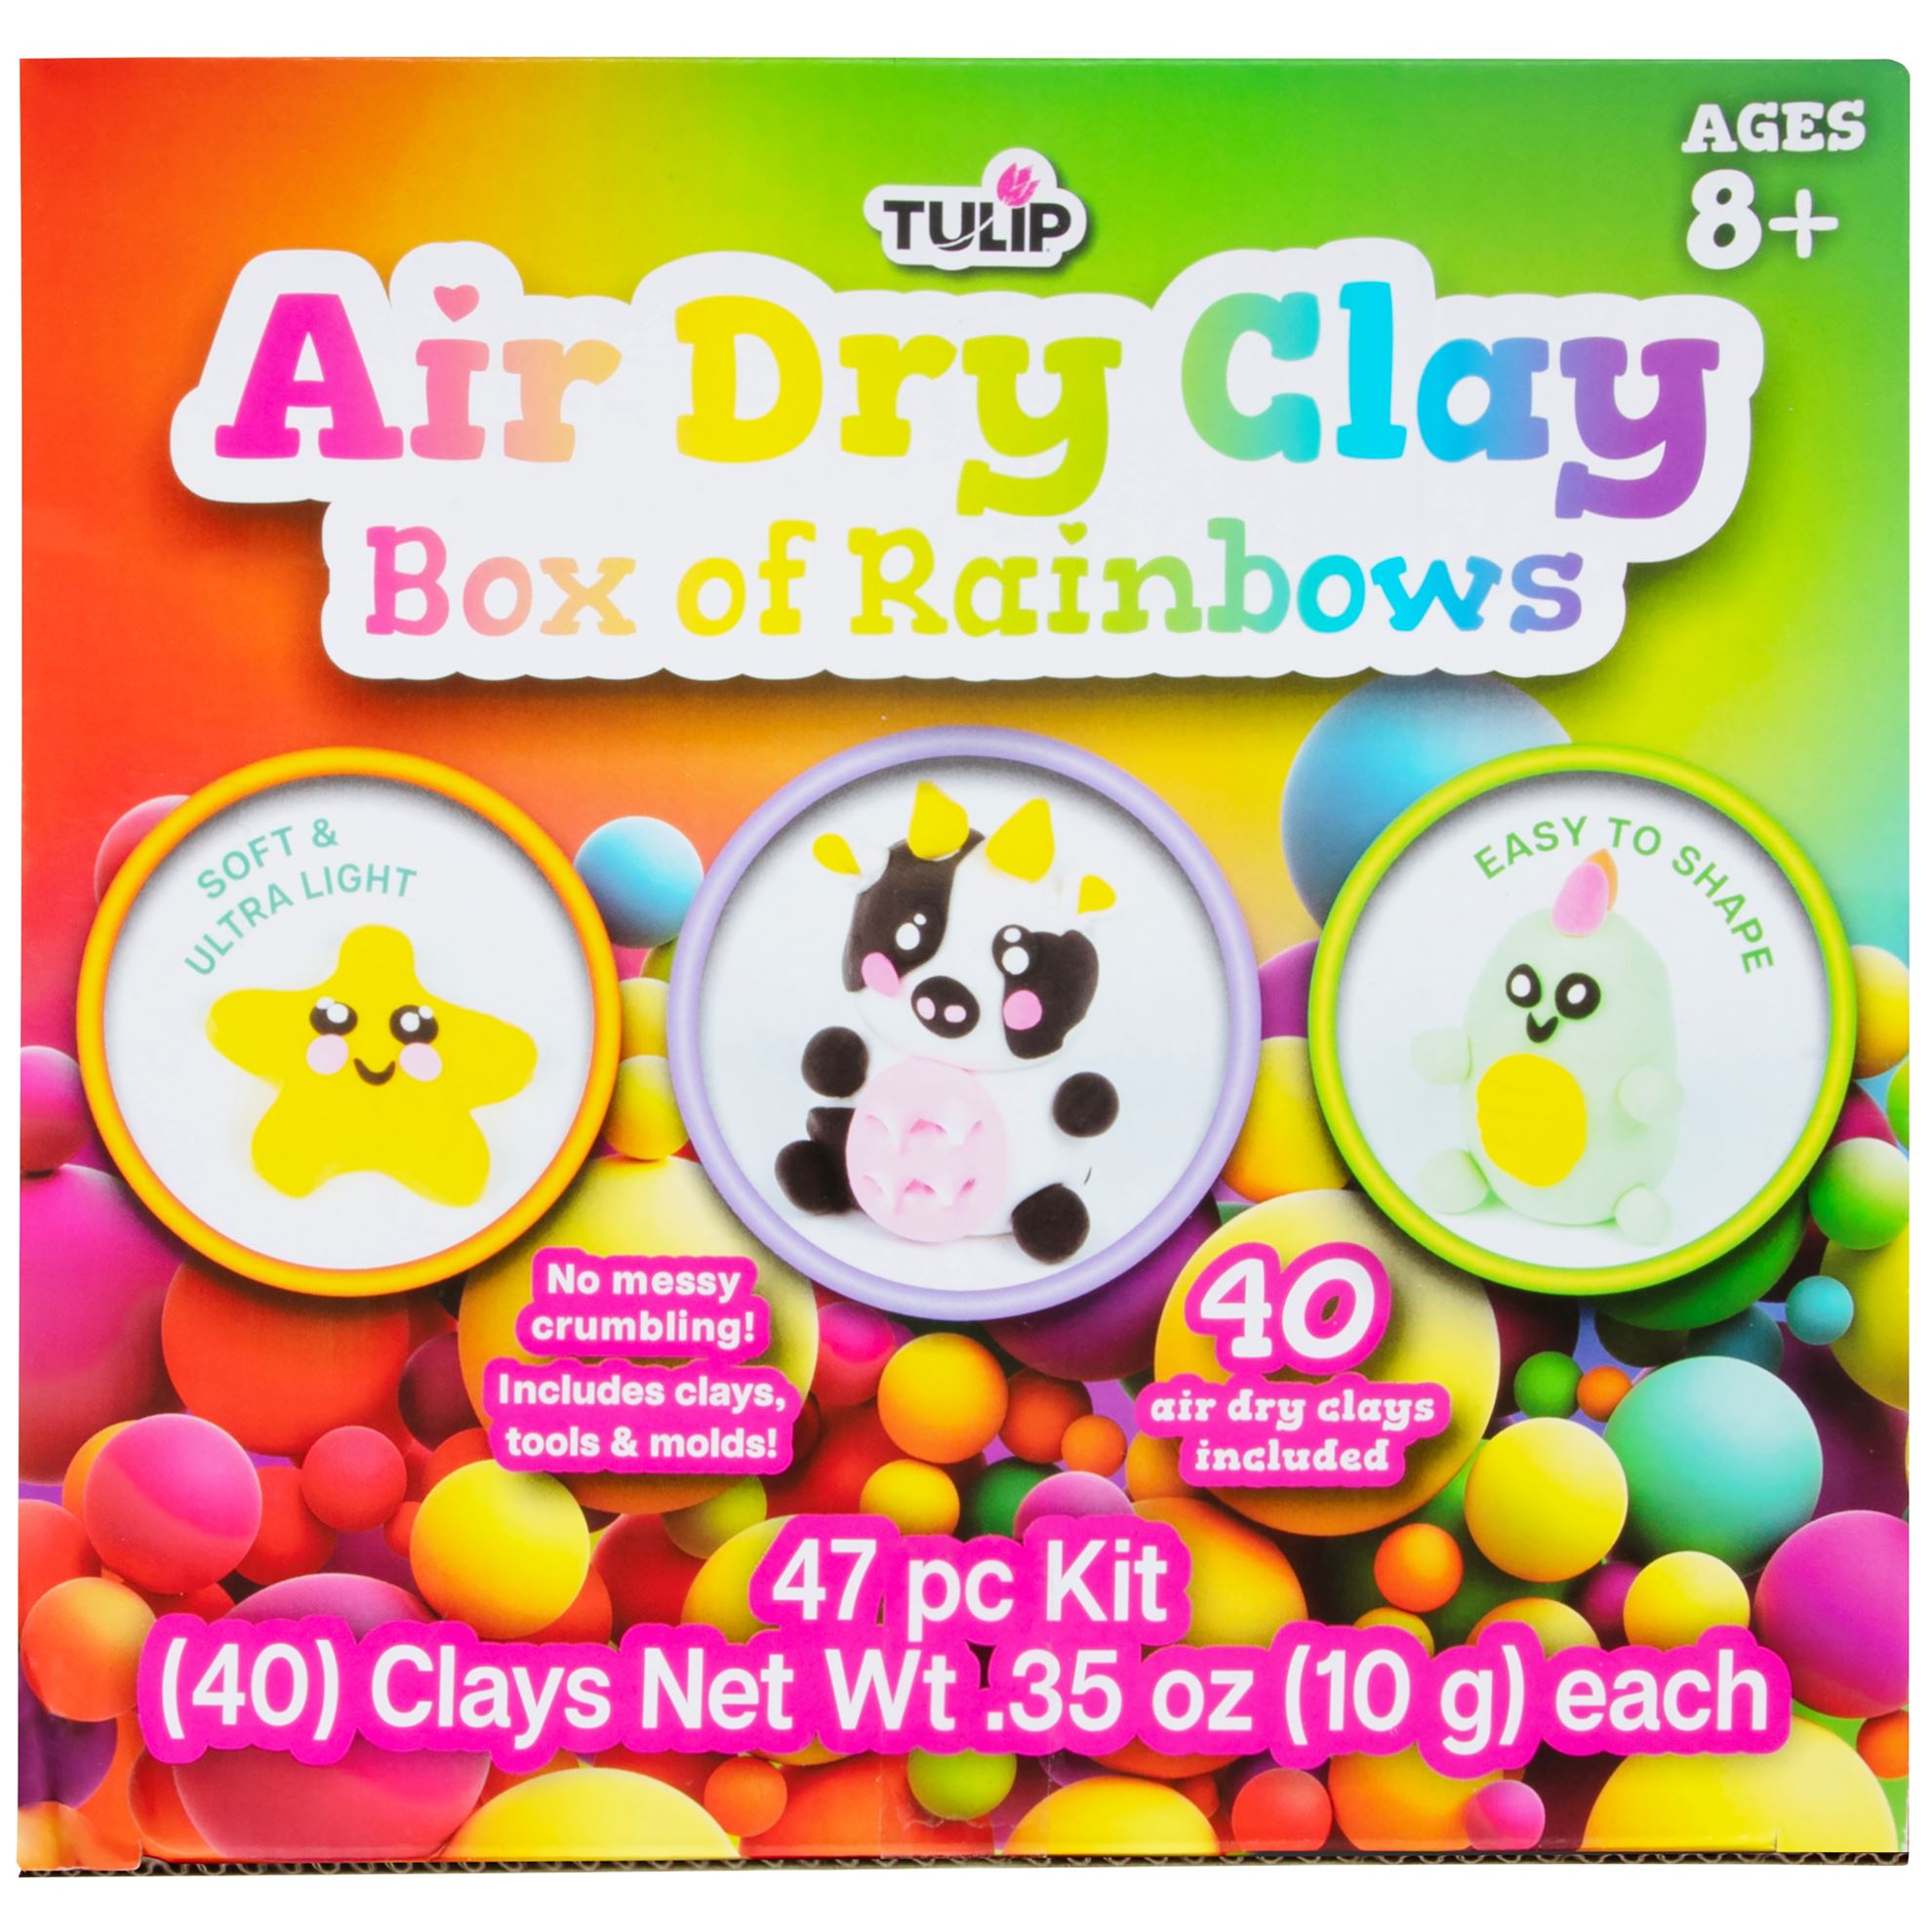 Picture of 48610 Tulip Air Dry Clay Box of Rainbows 47 pc Kit